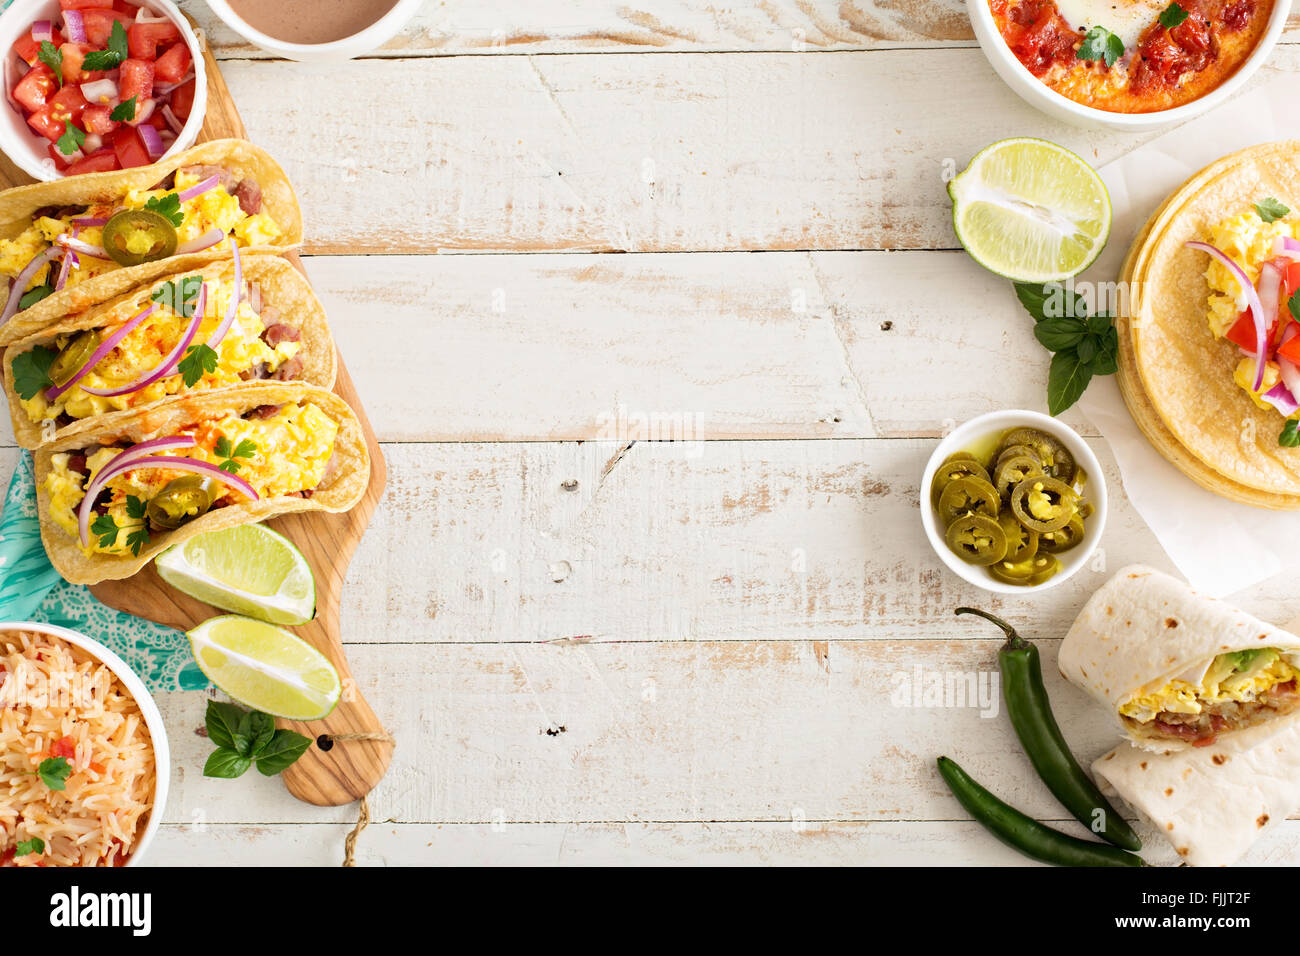 Variety of mexican cuisine dishes on a table Stock Photo